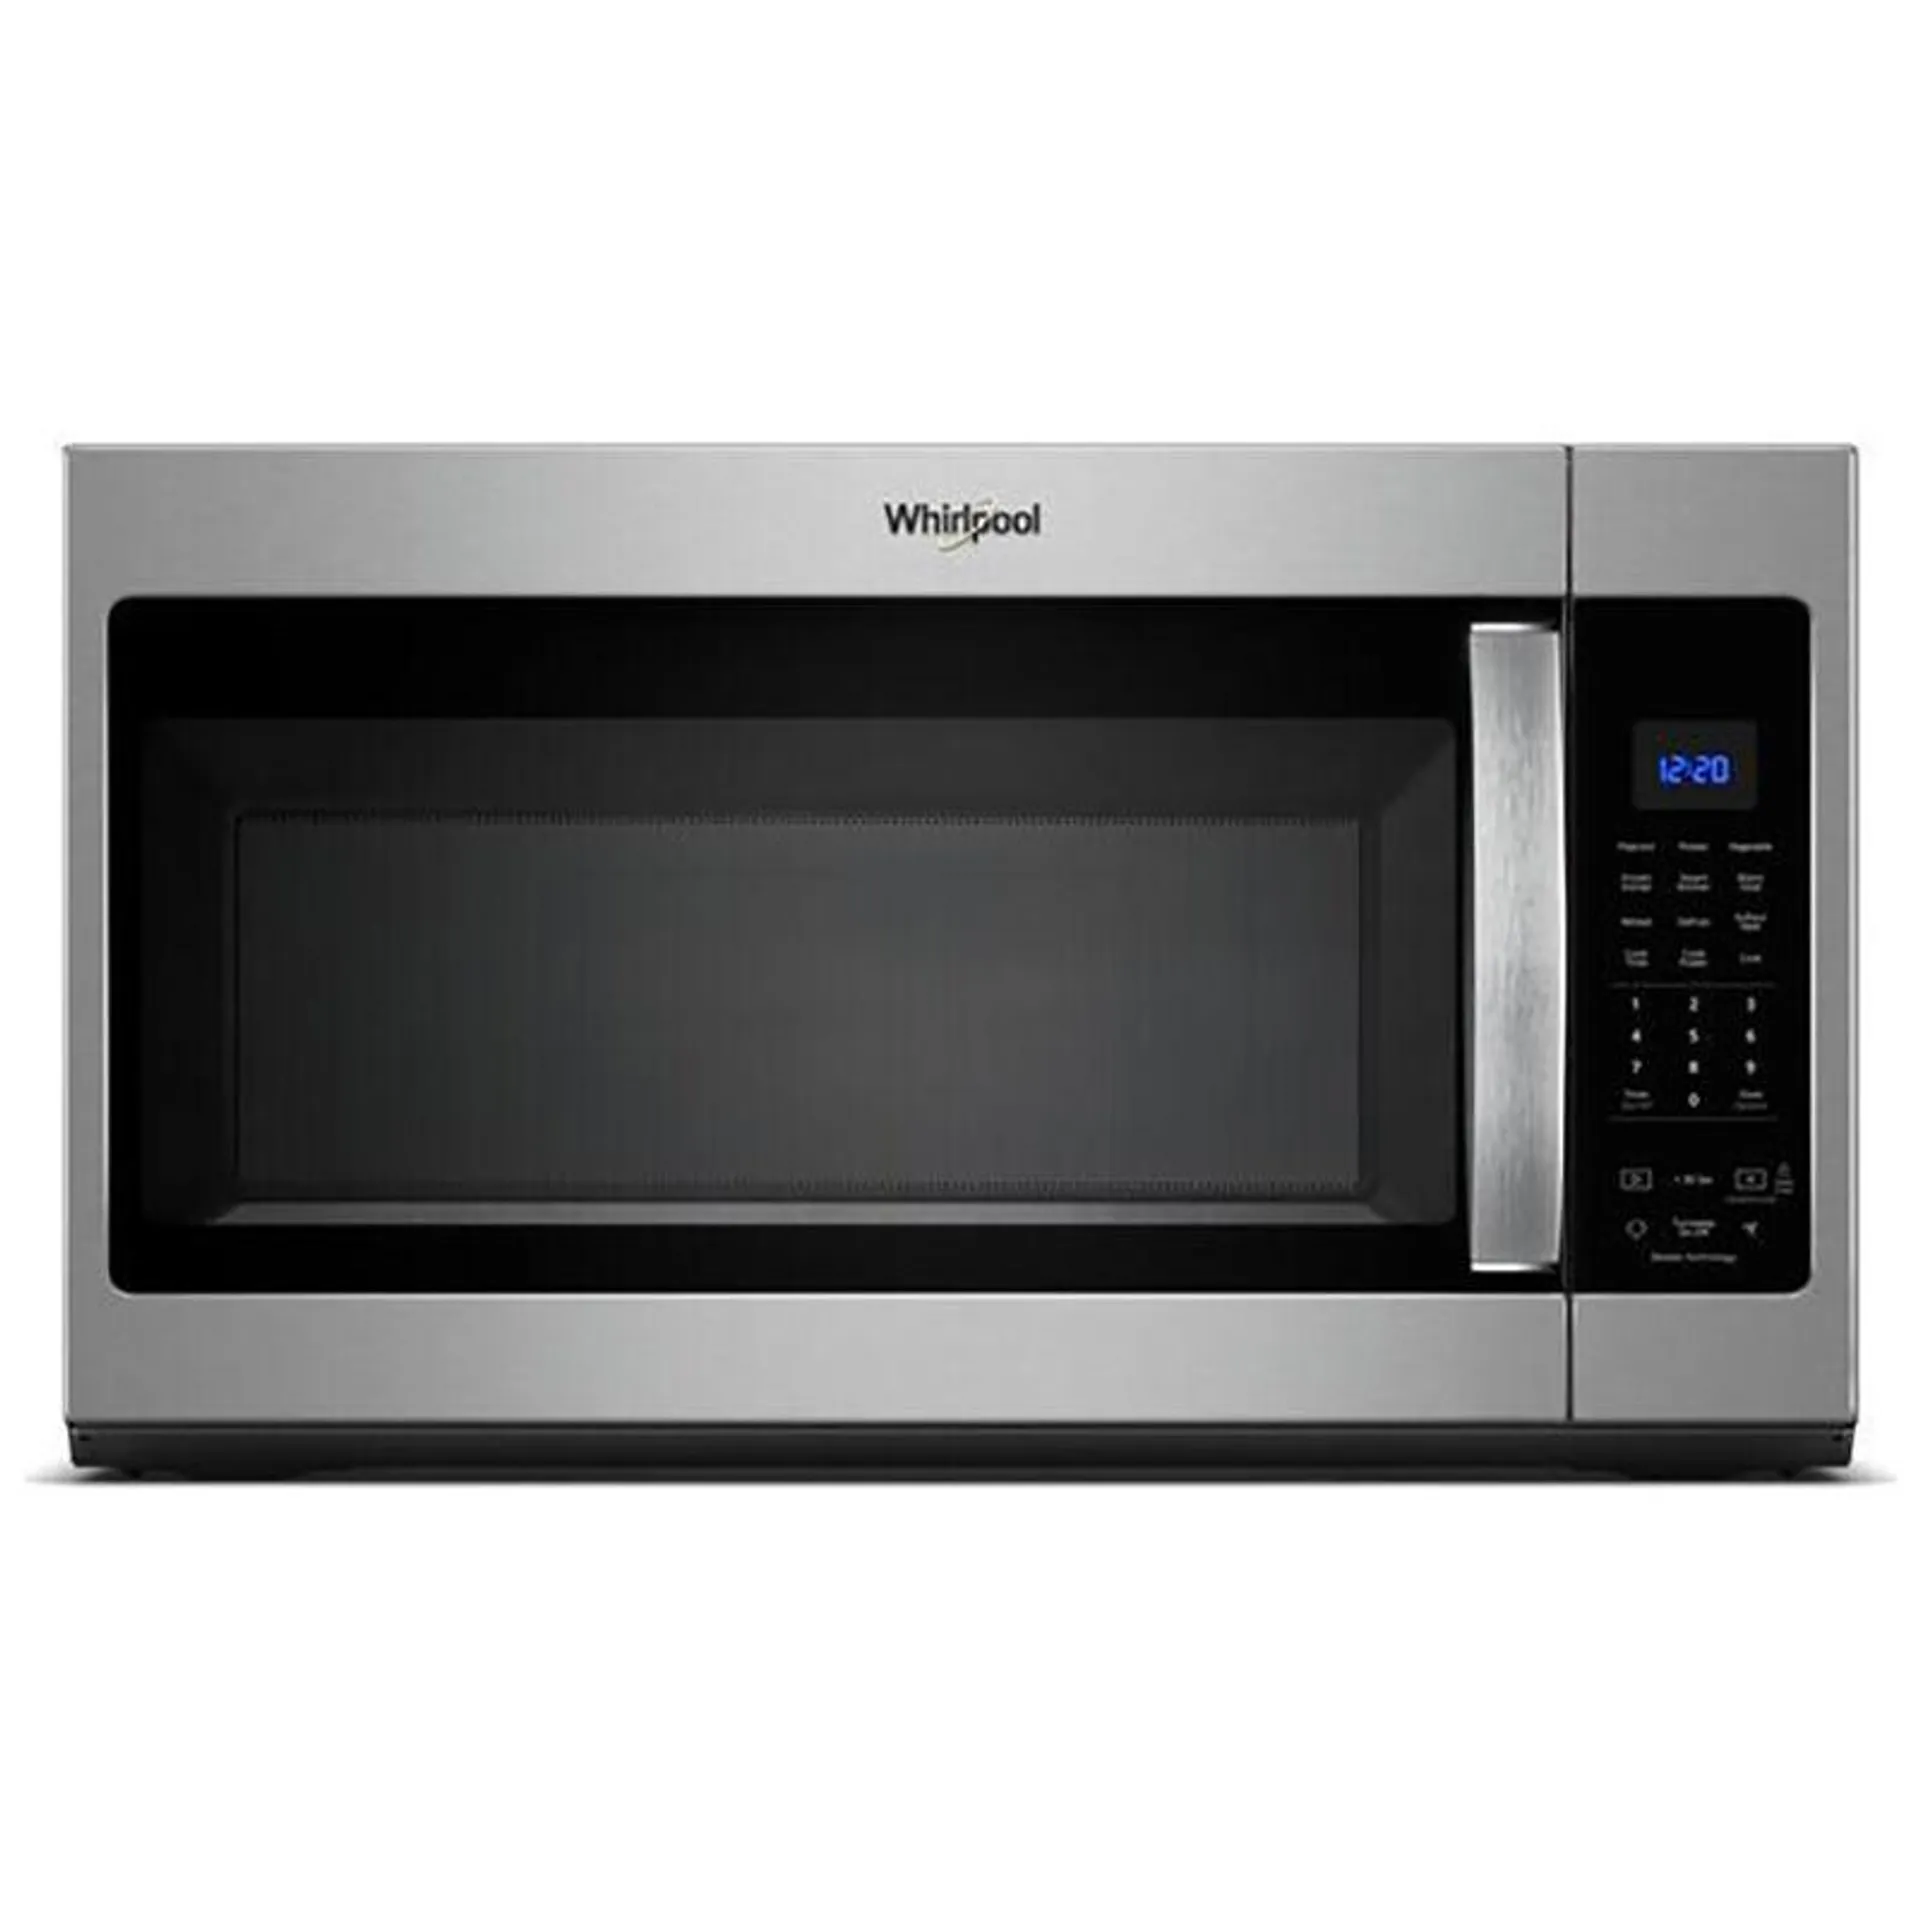 Whirlpool 30" 1.9 Cu. Ft. Over-the-Range Microwave with 10 Power Levels, 300 CFM & Sensor Cooking Controls - Fingerprint Resistant Stainless Steel